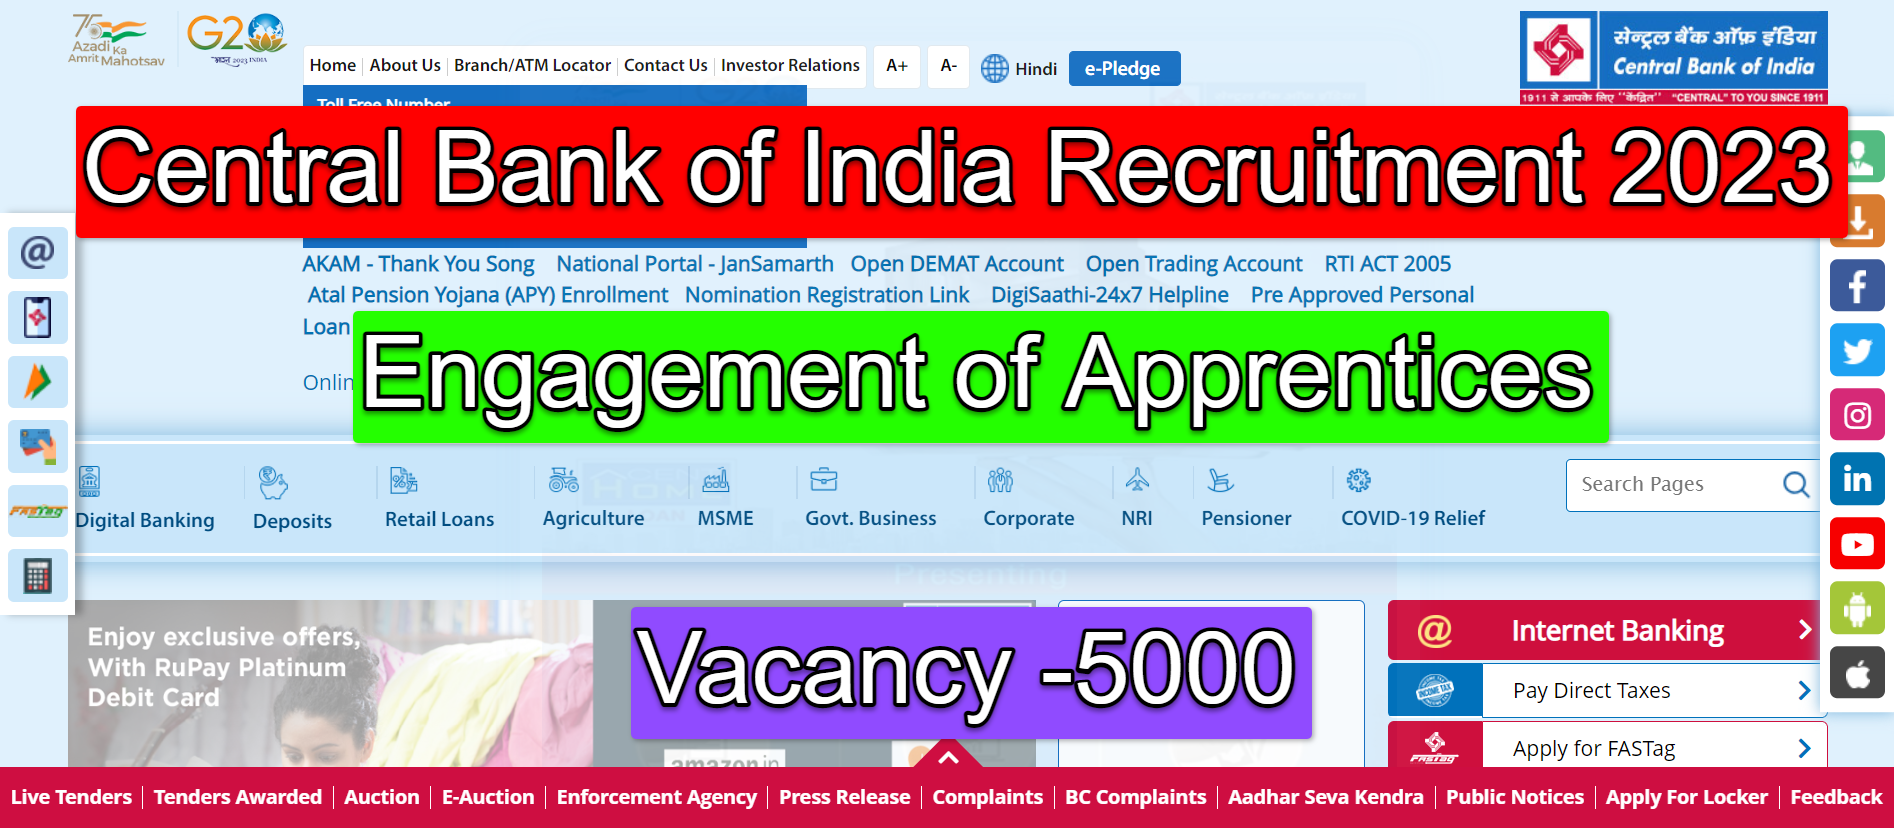 Central Bank of India Recruitment 2023 -Engagement of Apprentices